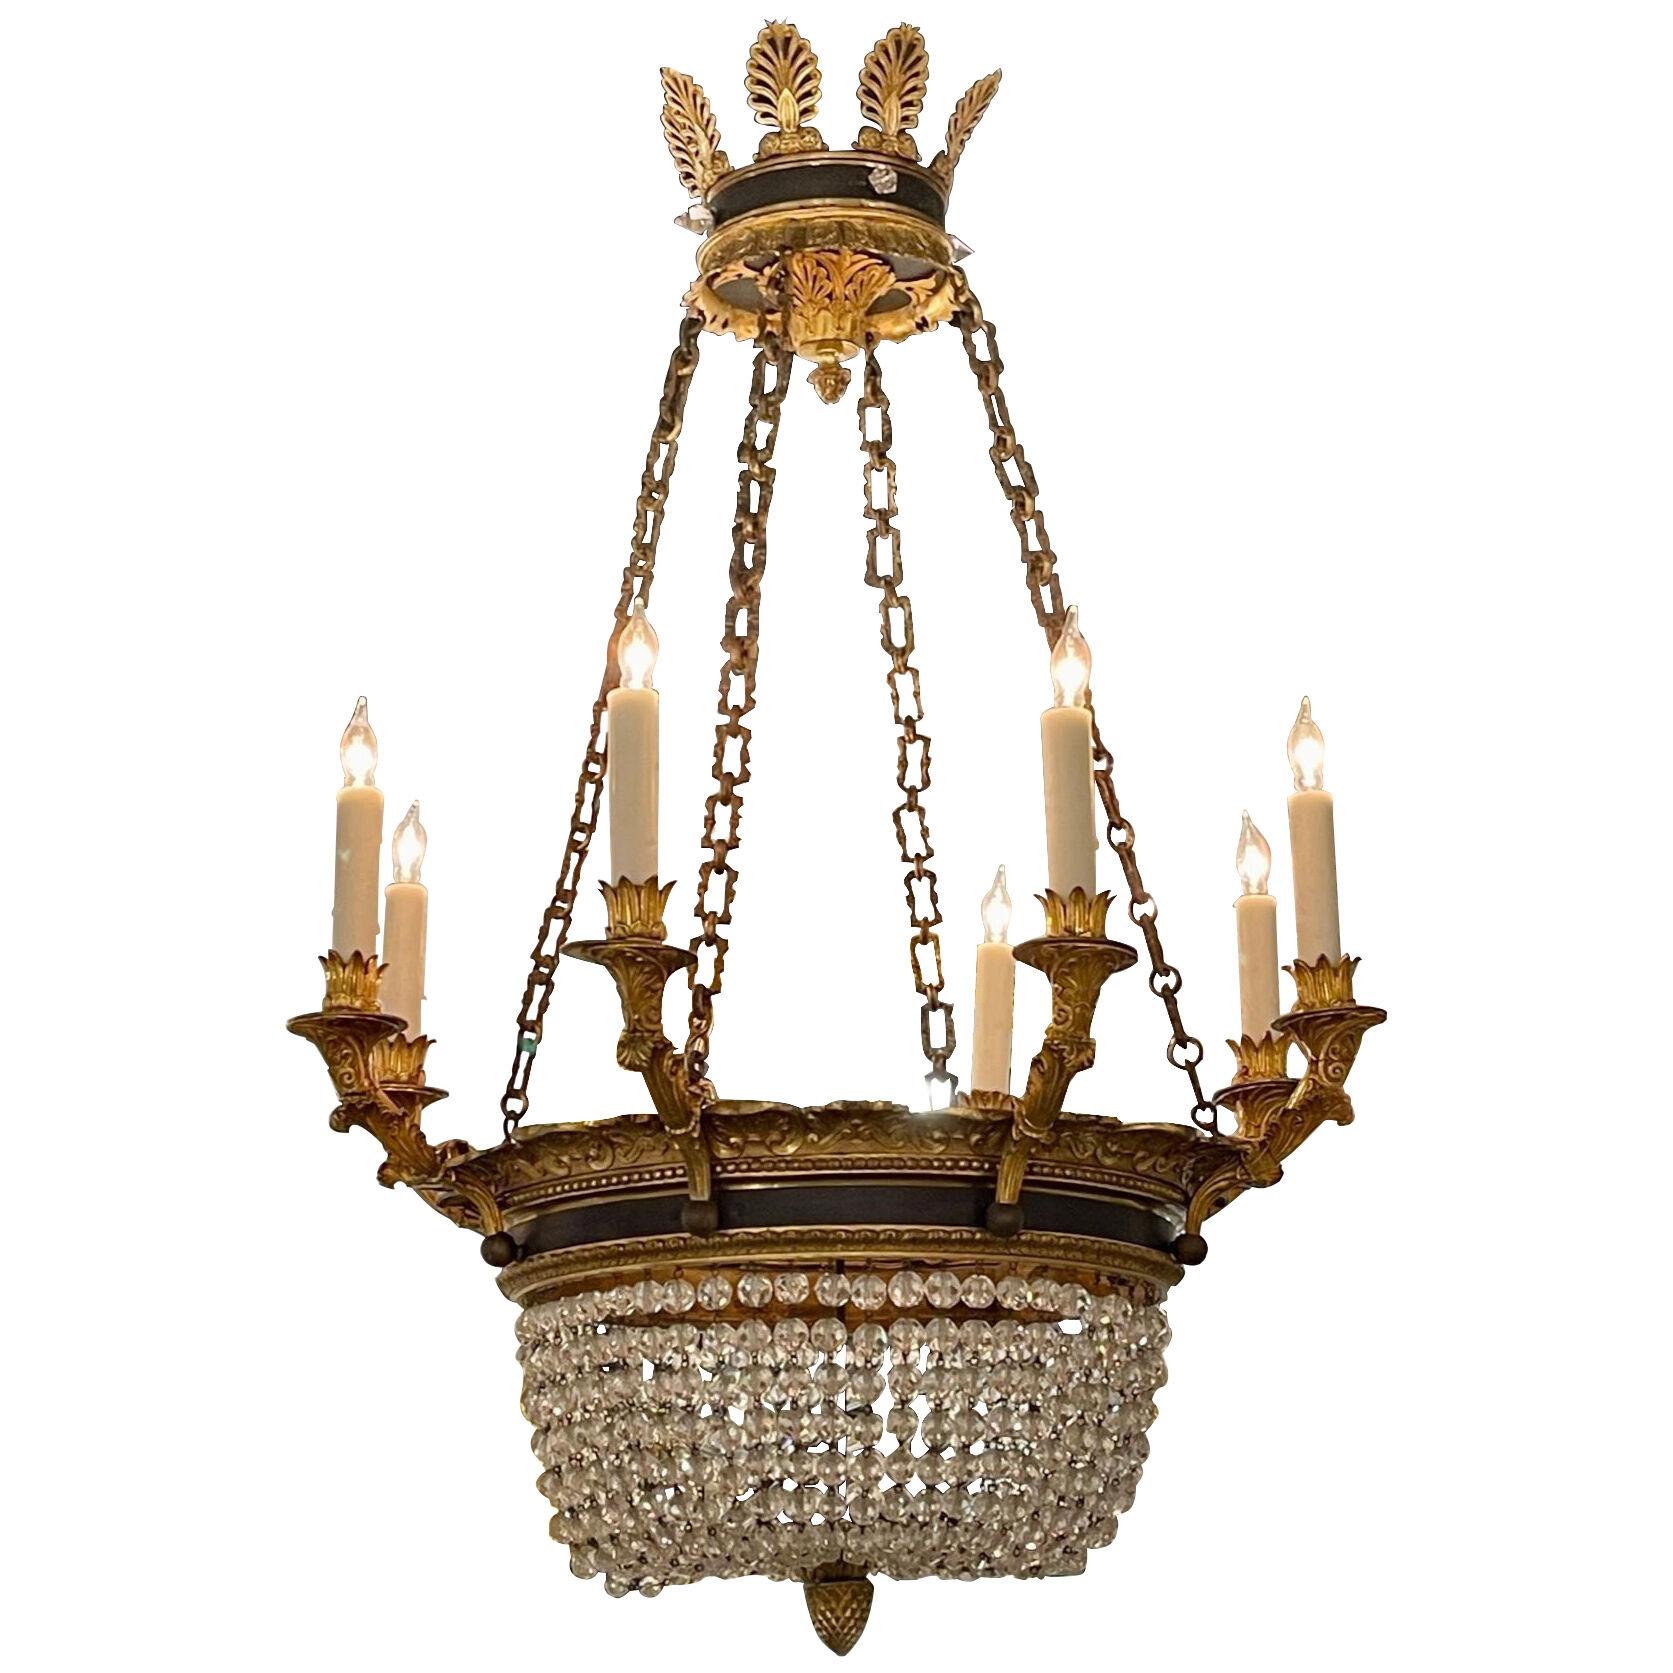 19th Century French Empire Basket Style Chandelier